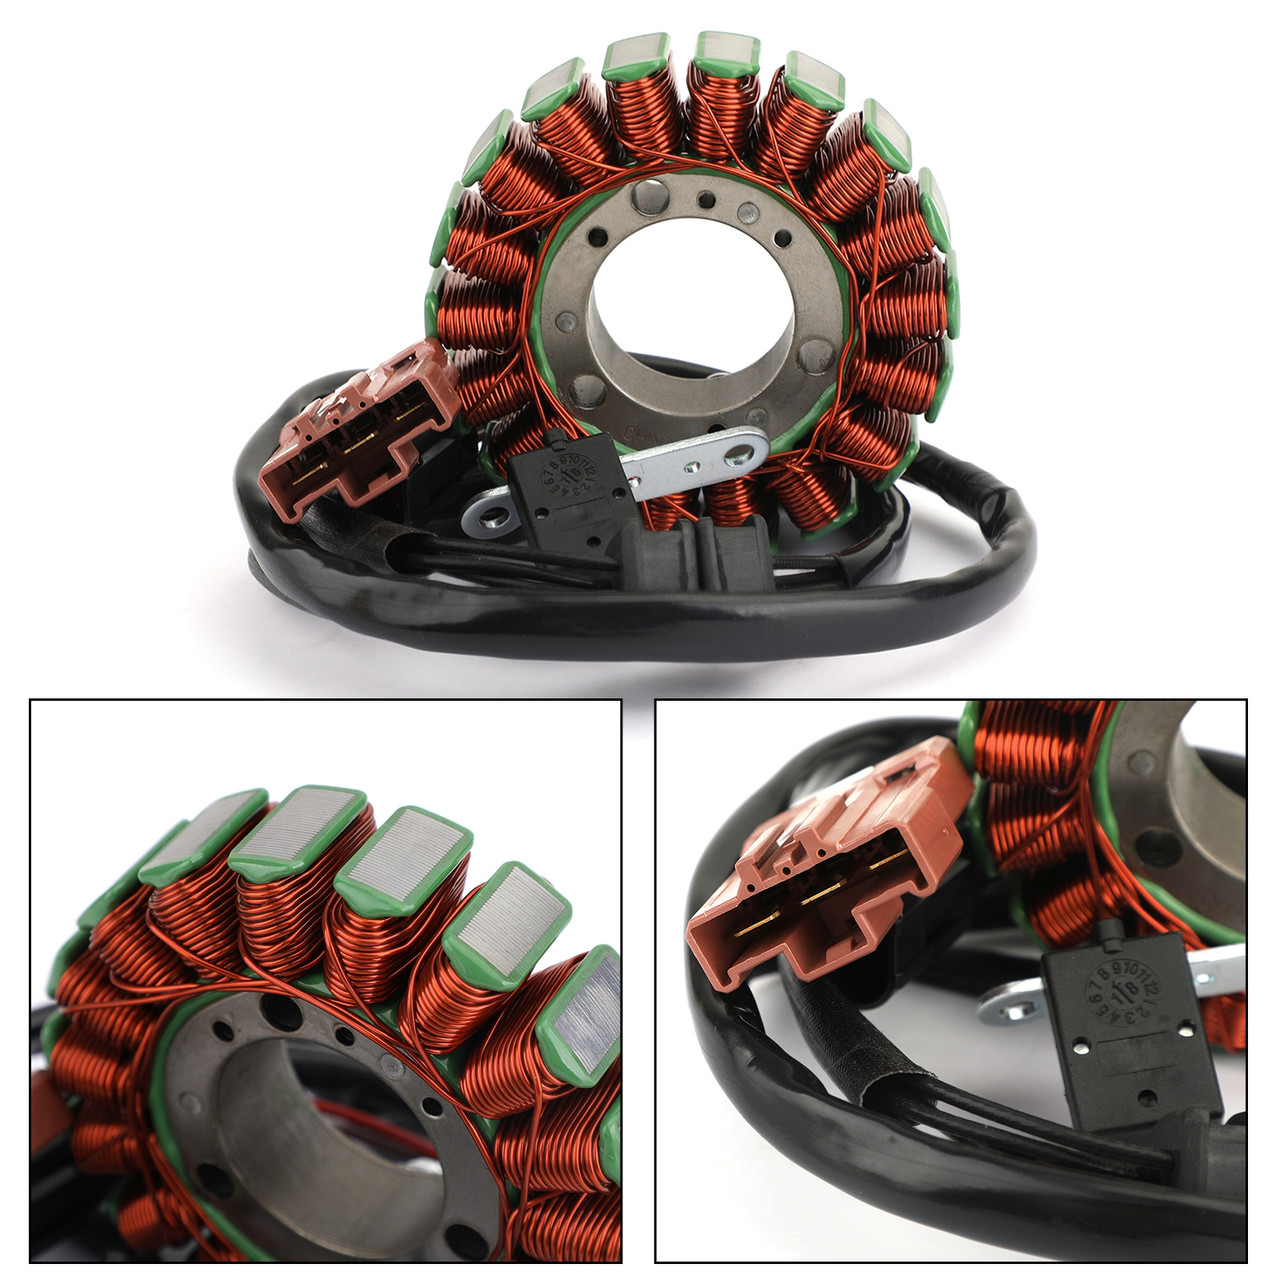 Magneto Generator Engine Stator Coil Fit for Scarabeo Scarabeo 500 Light 03-08